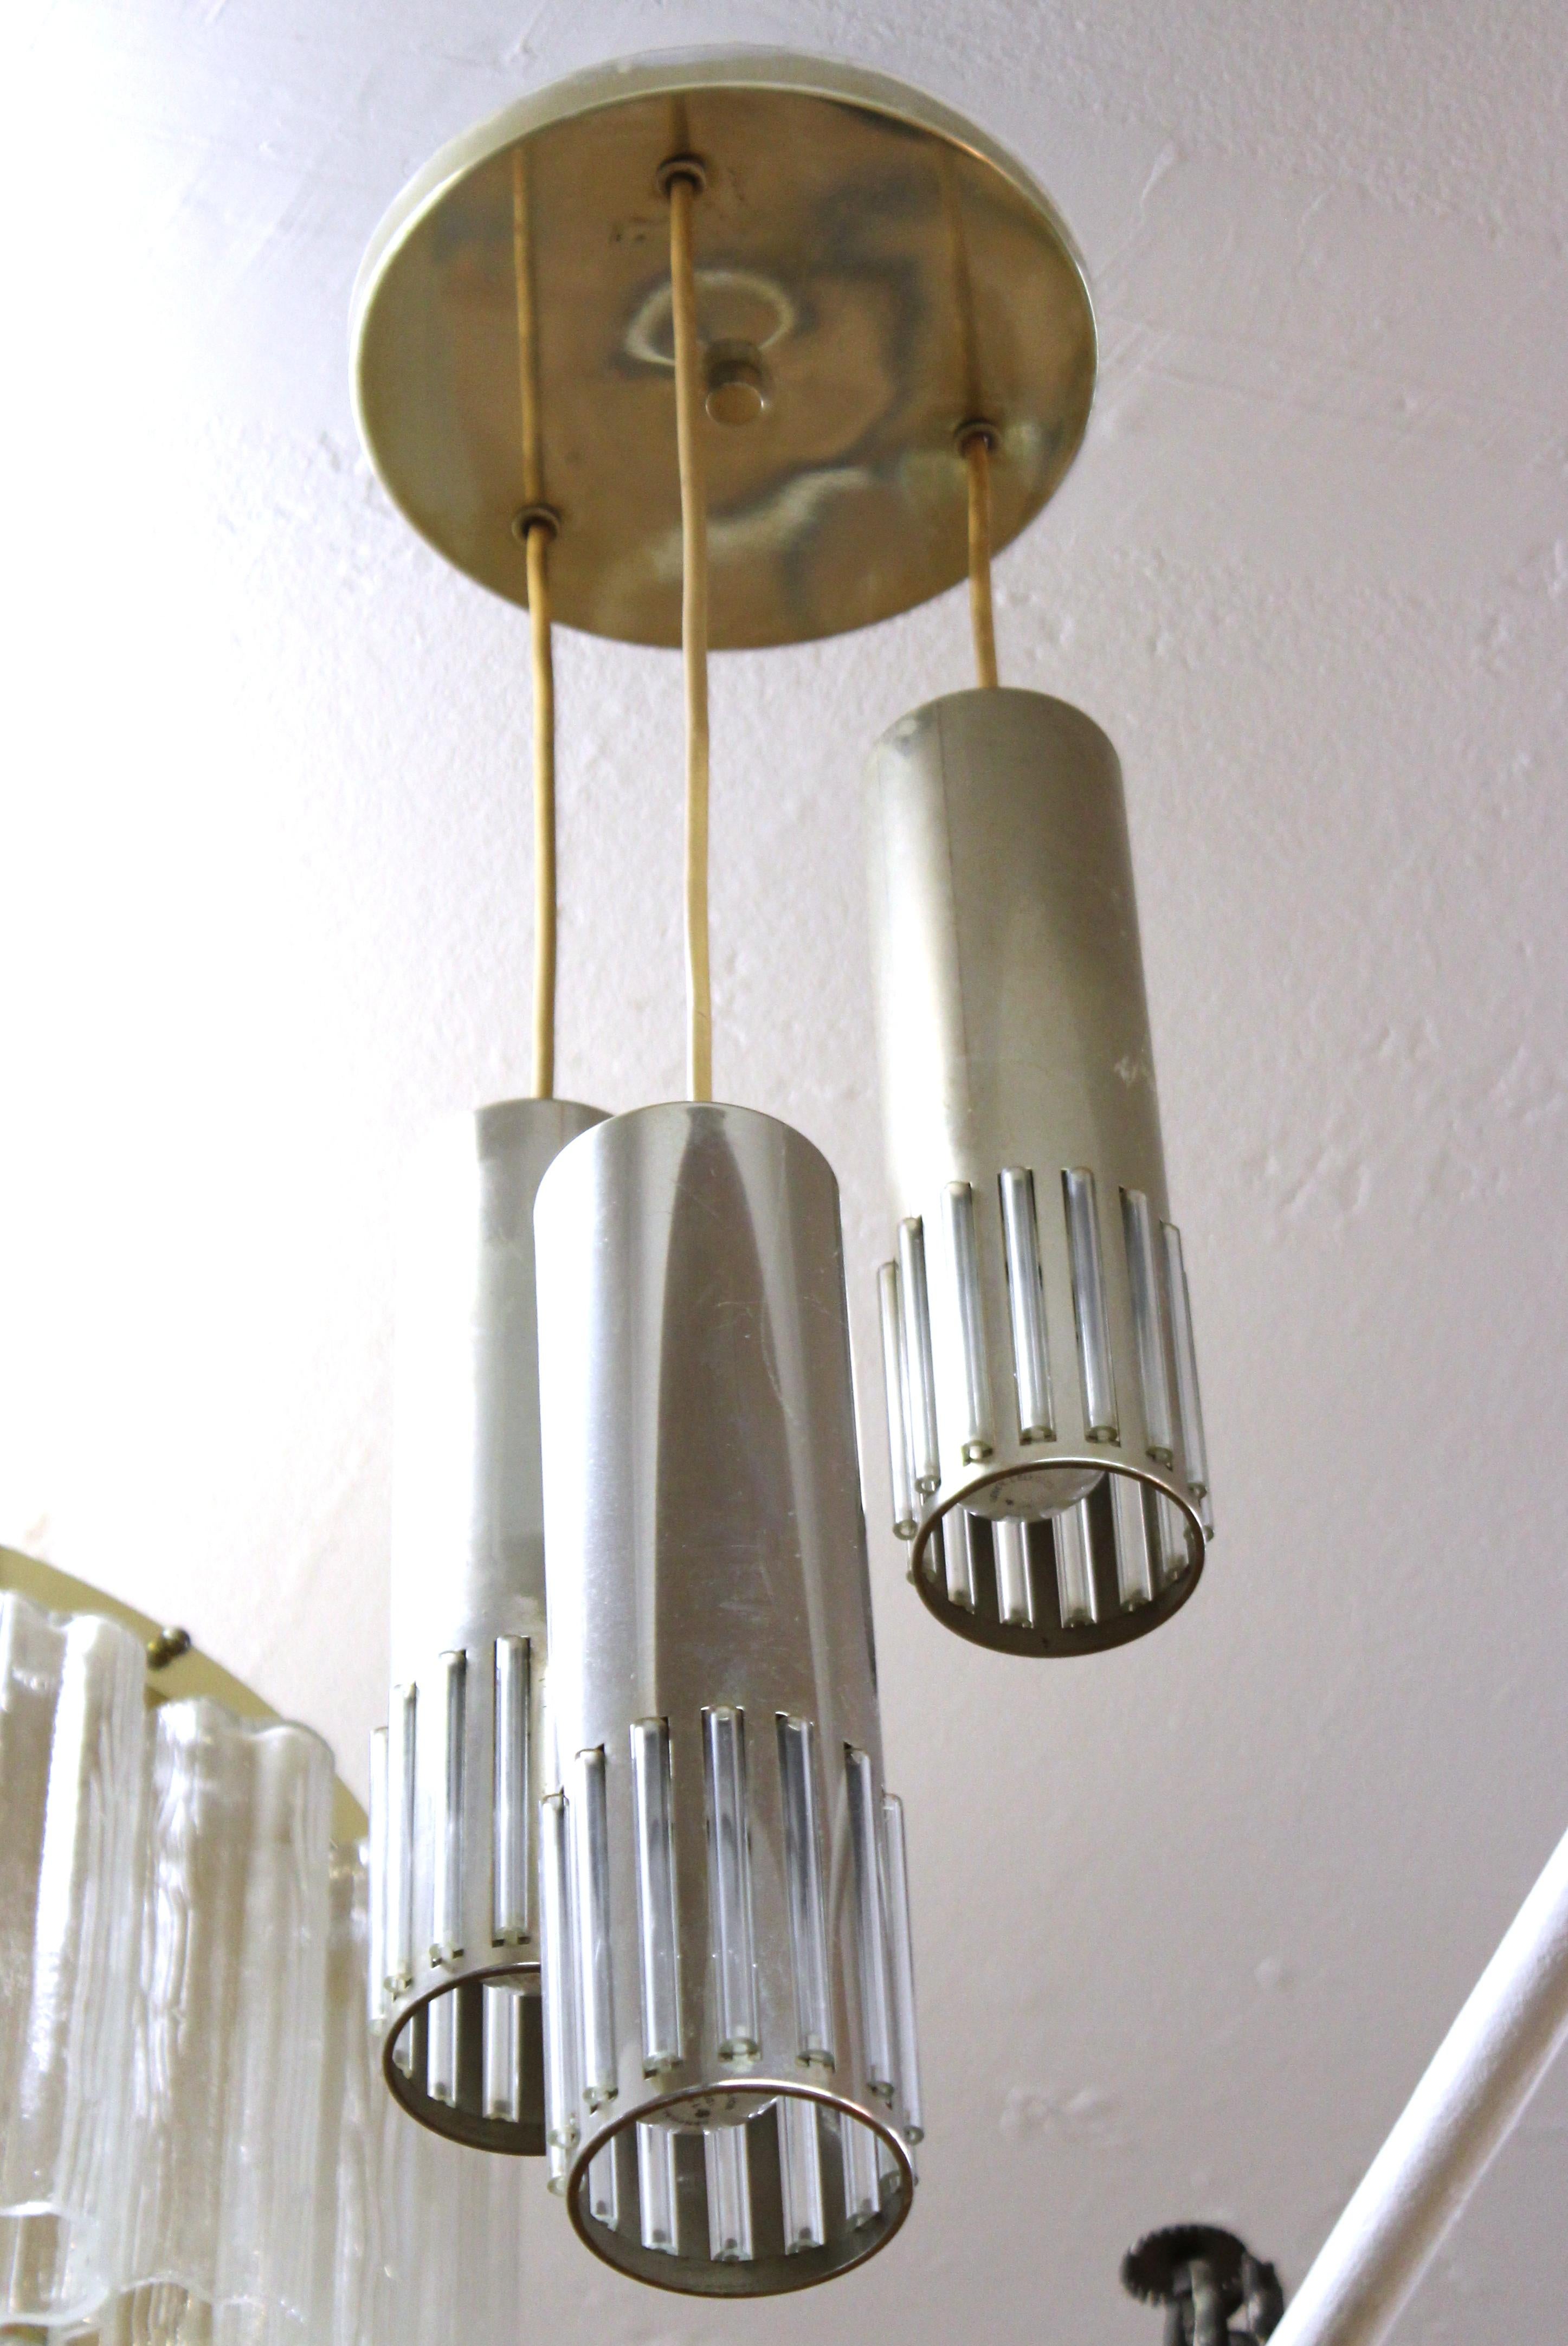 German Mid-Century Modern pendant light with three cascading tubular metal lights. Each tube has glass rod inserts on the bottom that refract the light from within. In great vintage condition with age-appropriate wear and use.